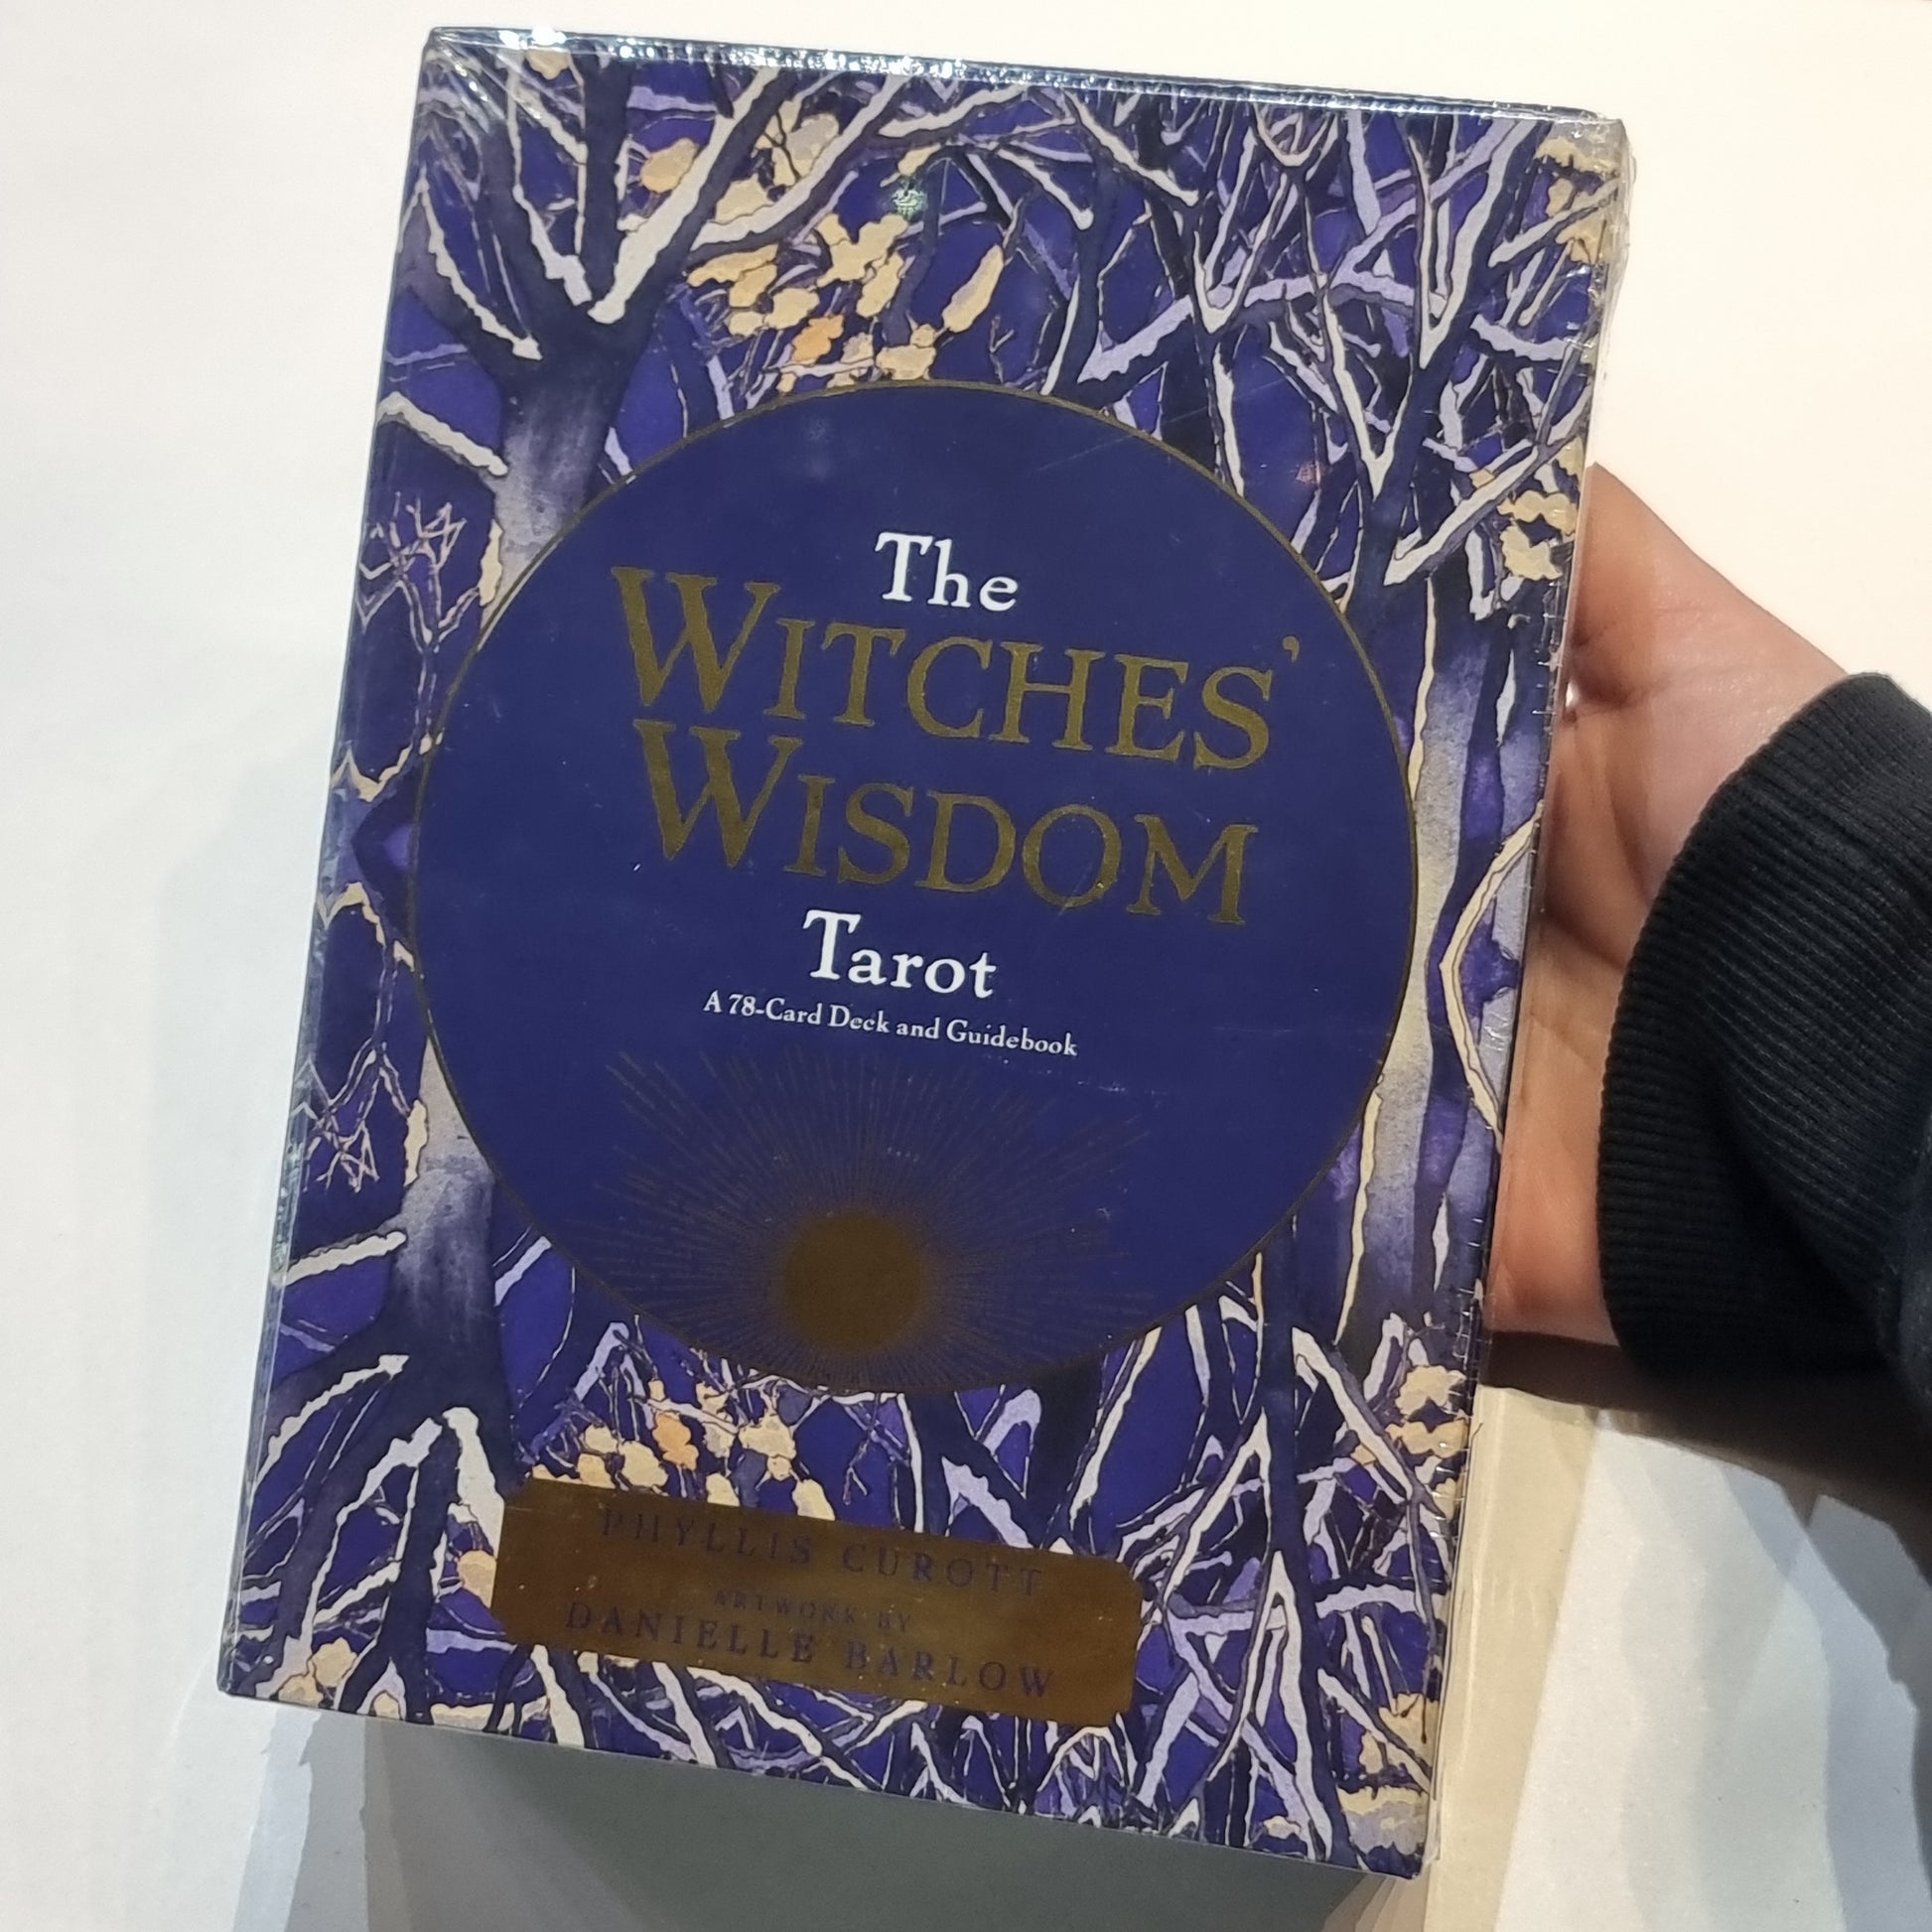 Witches wisdom tarot - Rivendell Shop